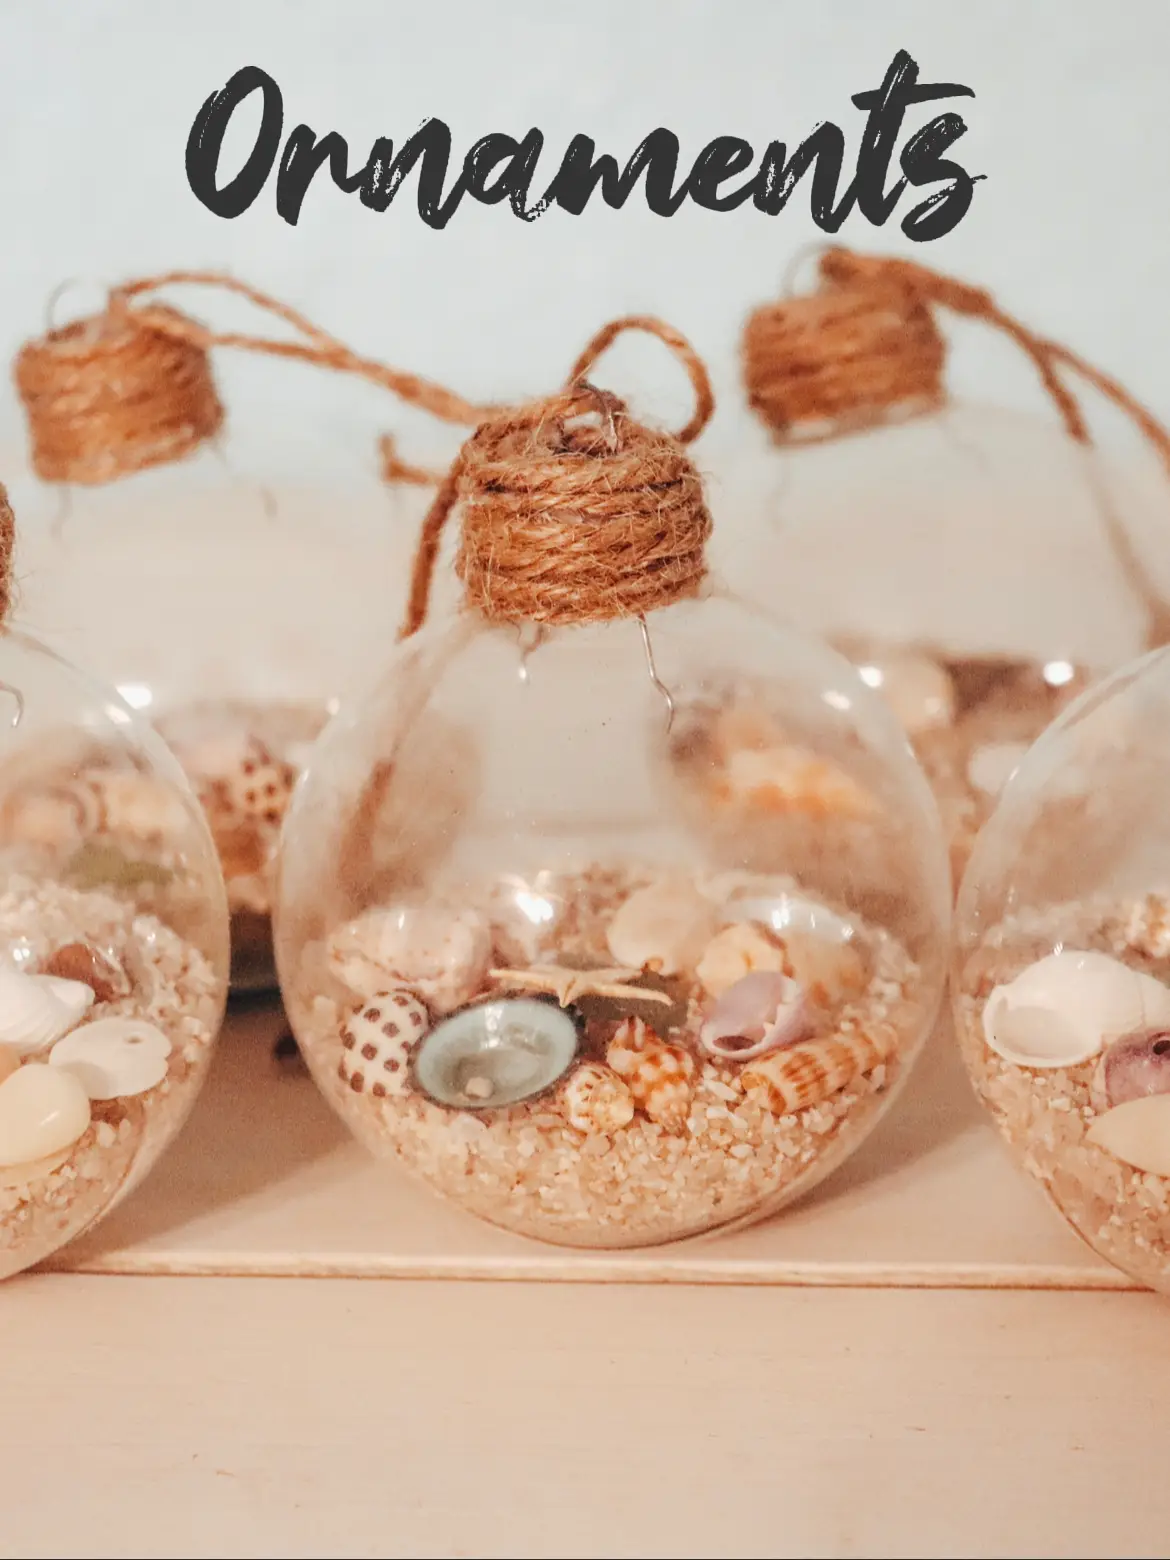 Beach Vibes Only! 16 Creative Seashell Crafts + DIY Decor Projects